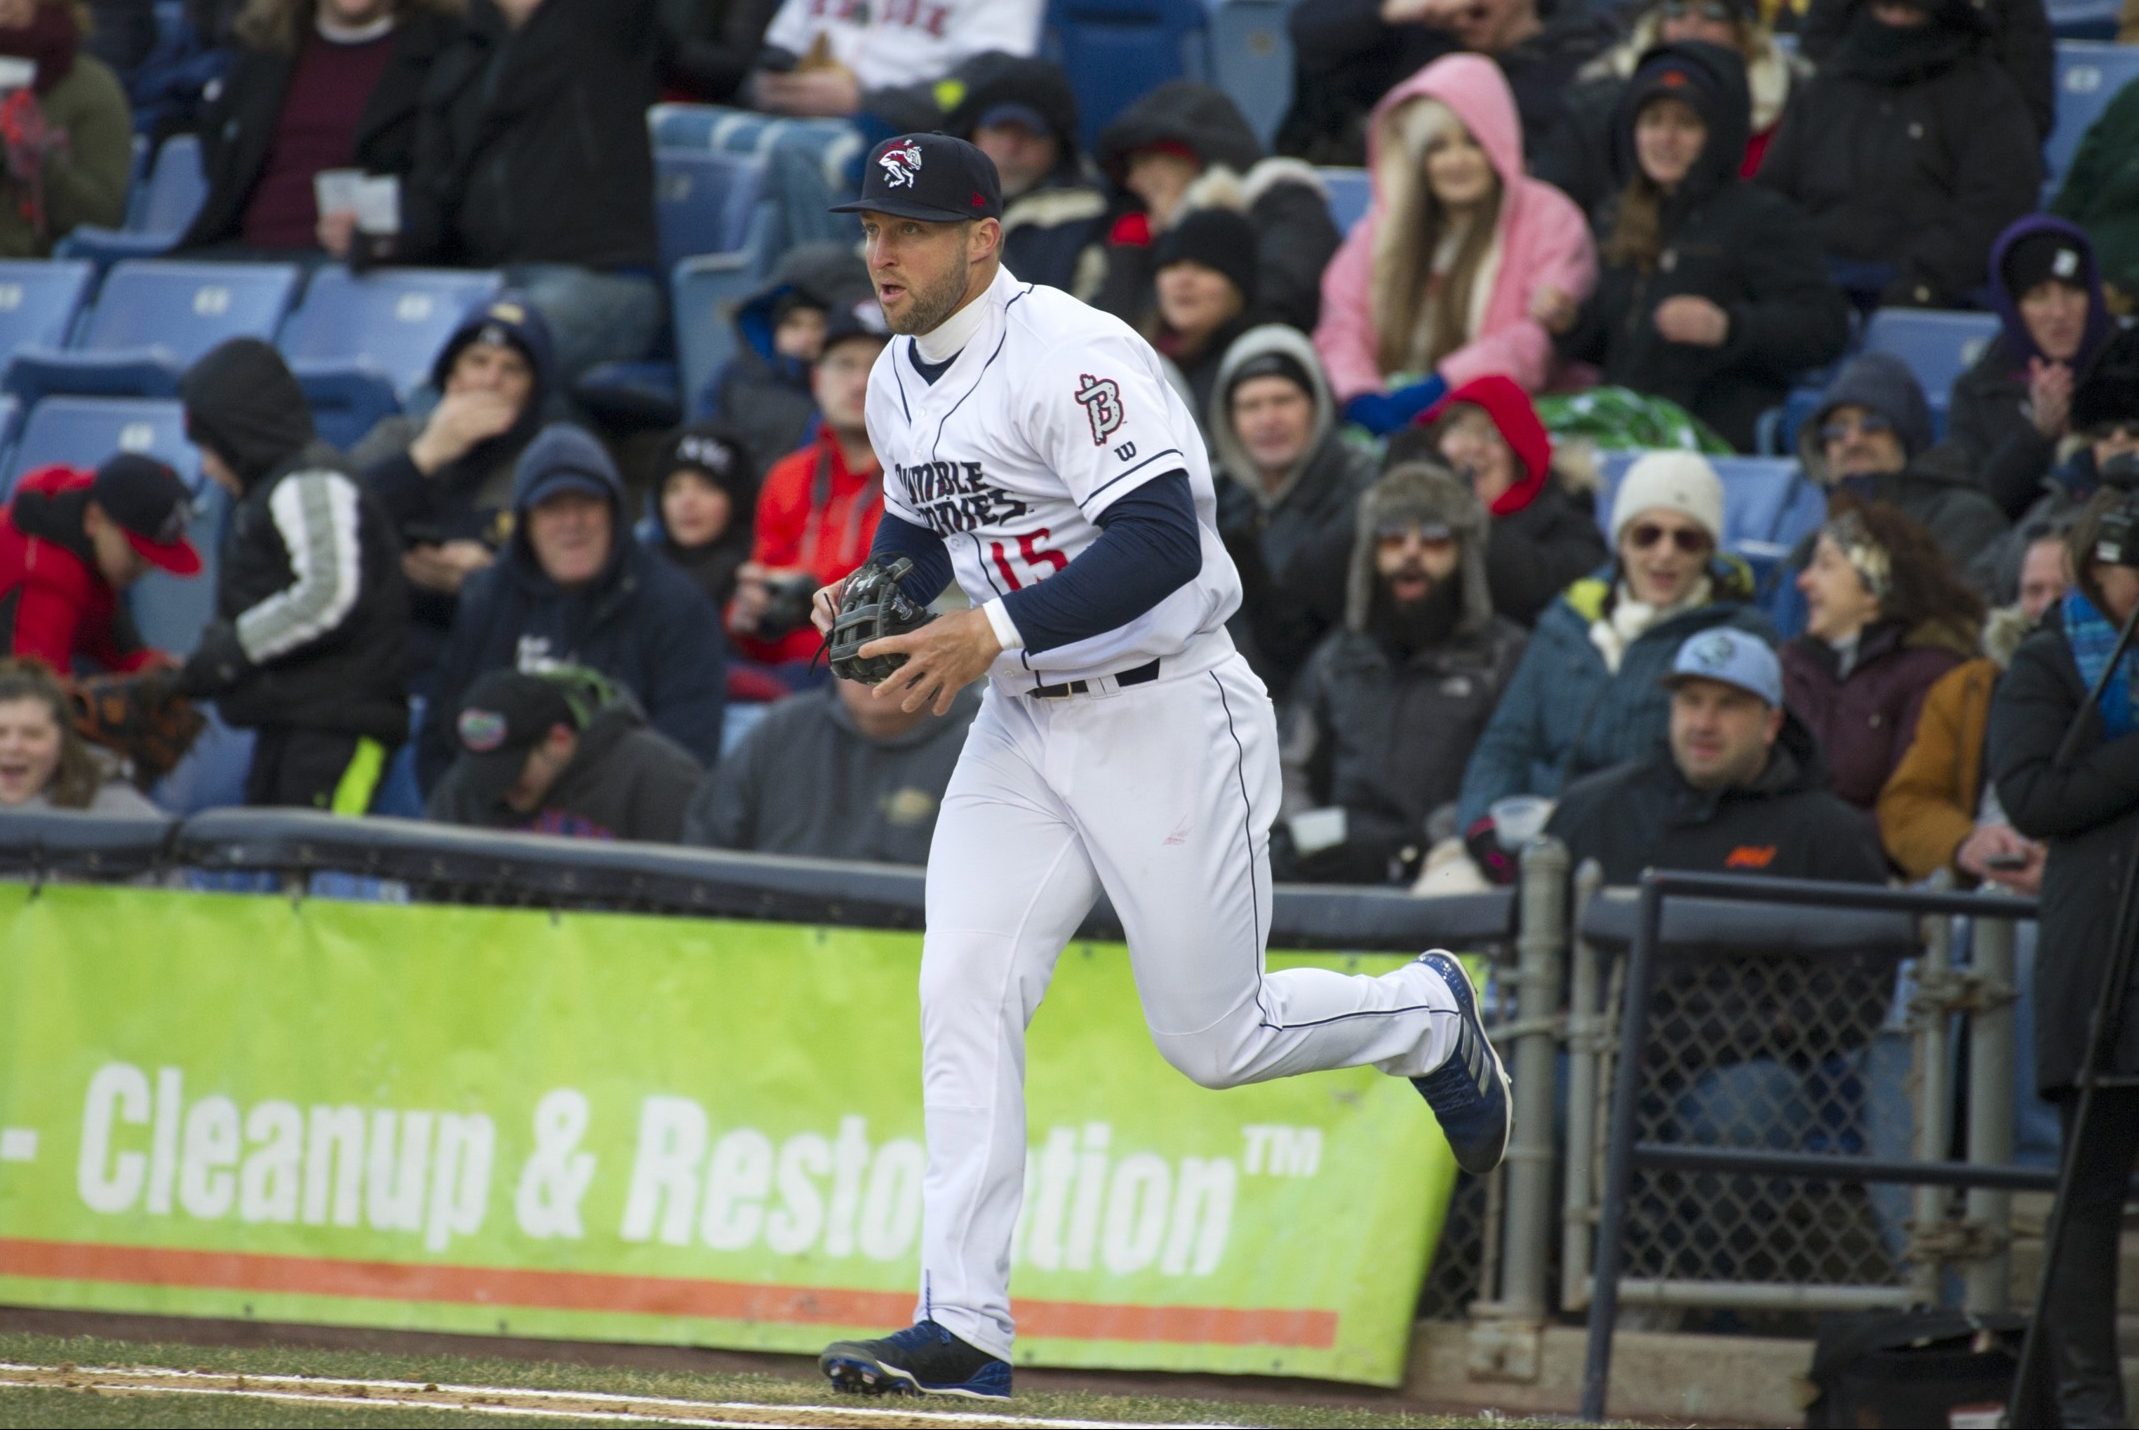 Tim Tebow (15) runs onto the field during his debut with the Binghamton Rumble Ponies, against the Portland Sea Dogs in a Double-A baseball game Thursday, April 5, 2018, in Binghamton, N.Y. (AP Photo/Matt Smith)